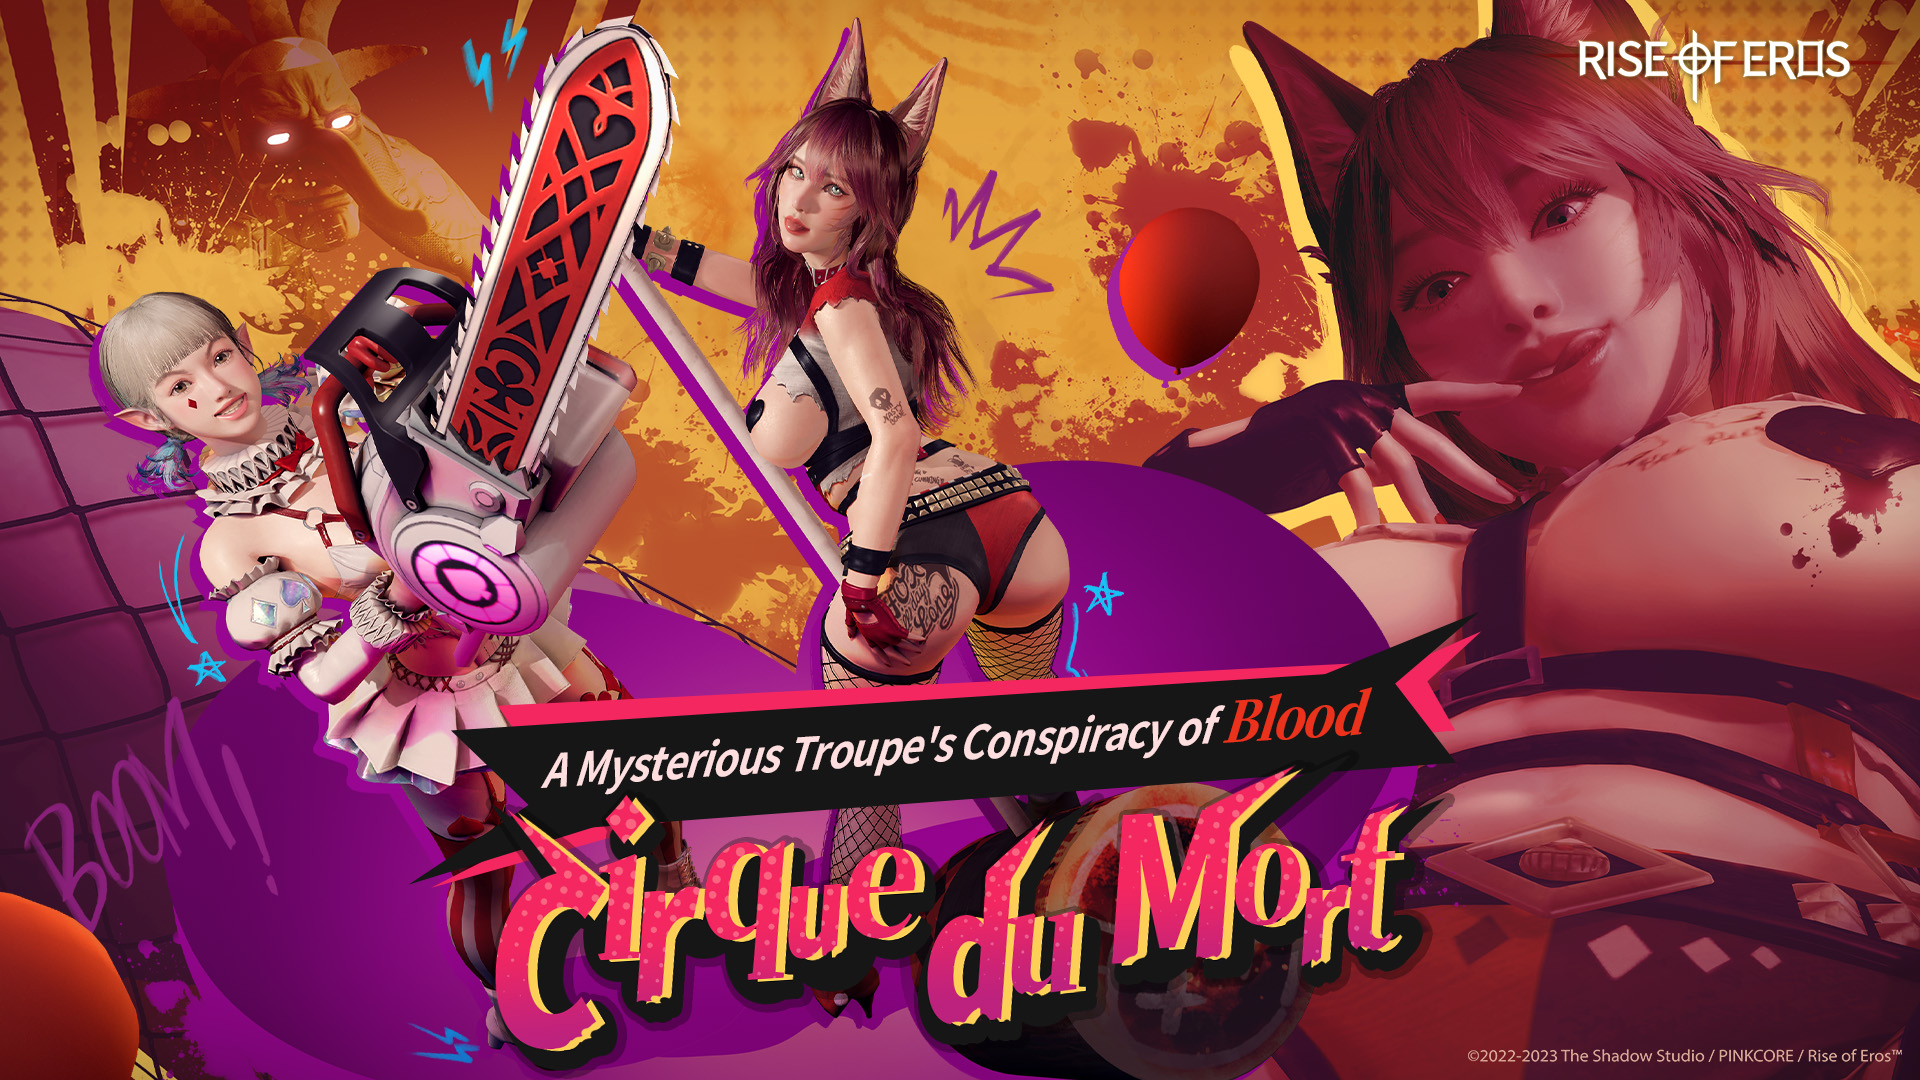 Cirque du Mort ～A Mysterious Troupe's Conspiracy of Blood～